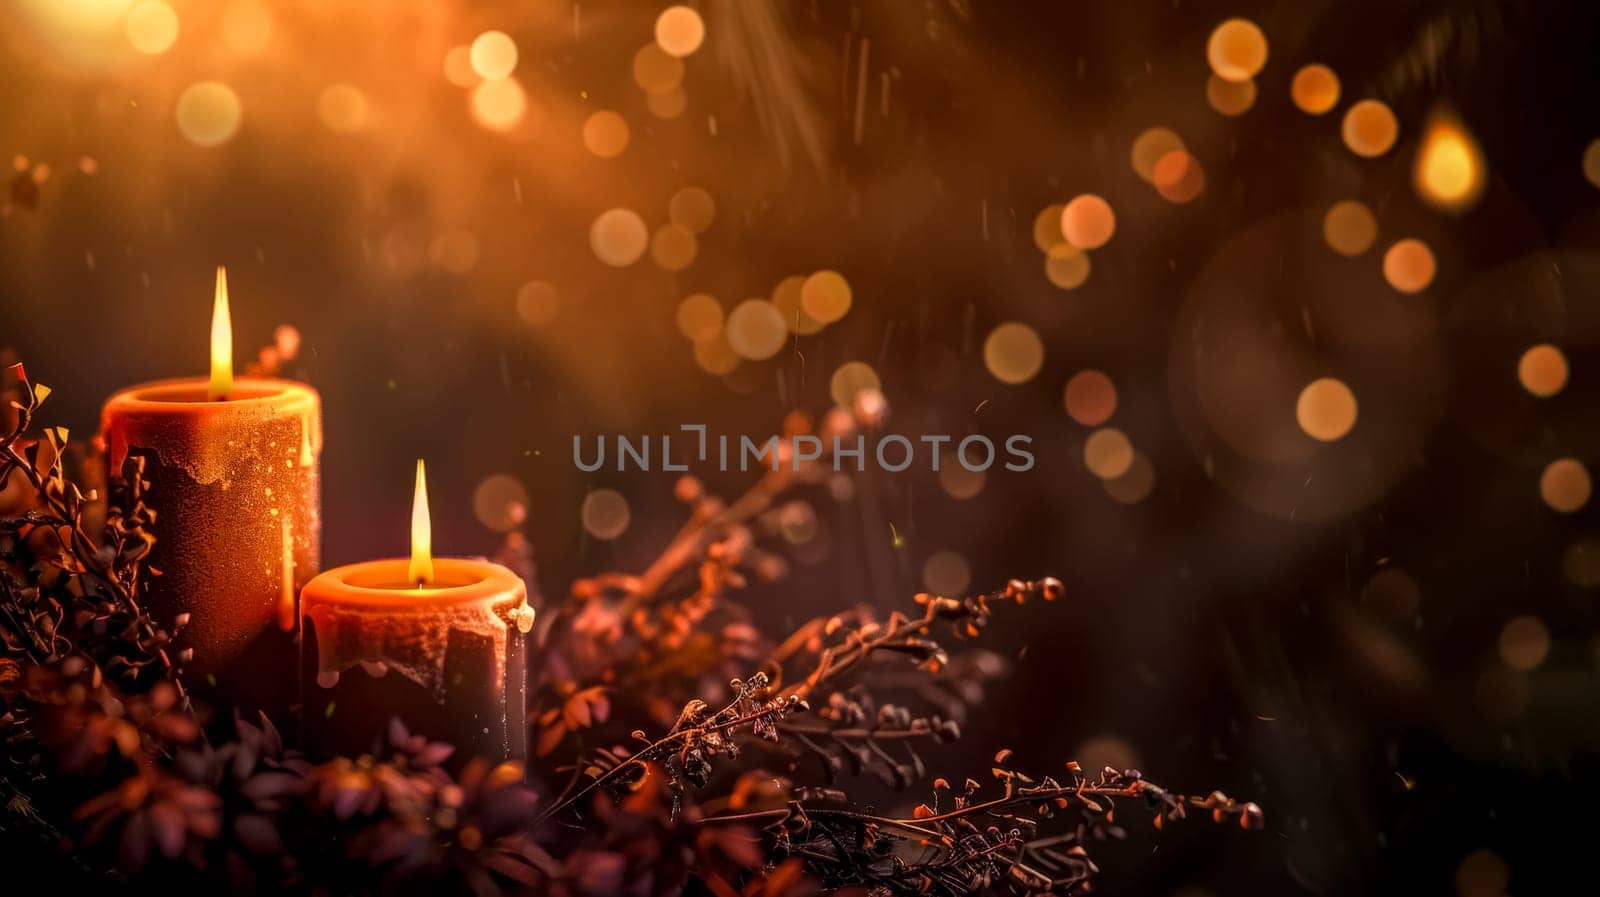 Warm candlelight glow in festive ambiance by Edophoto